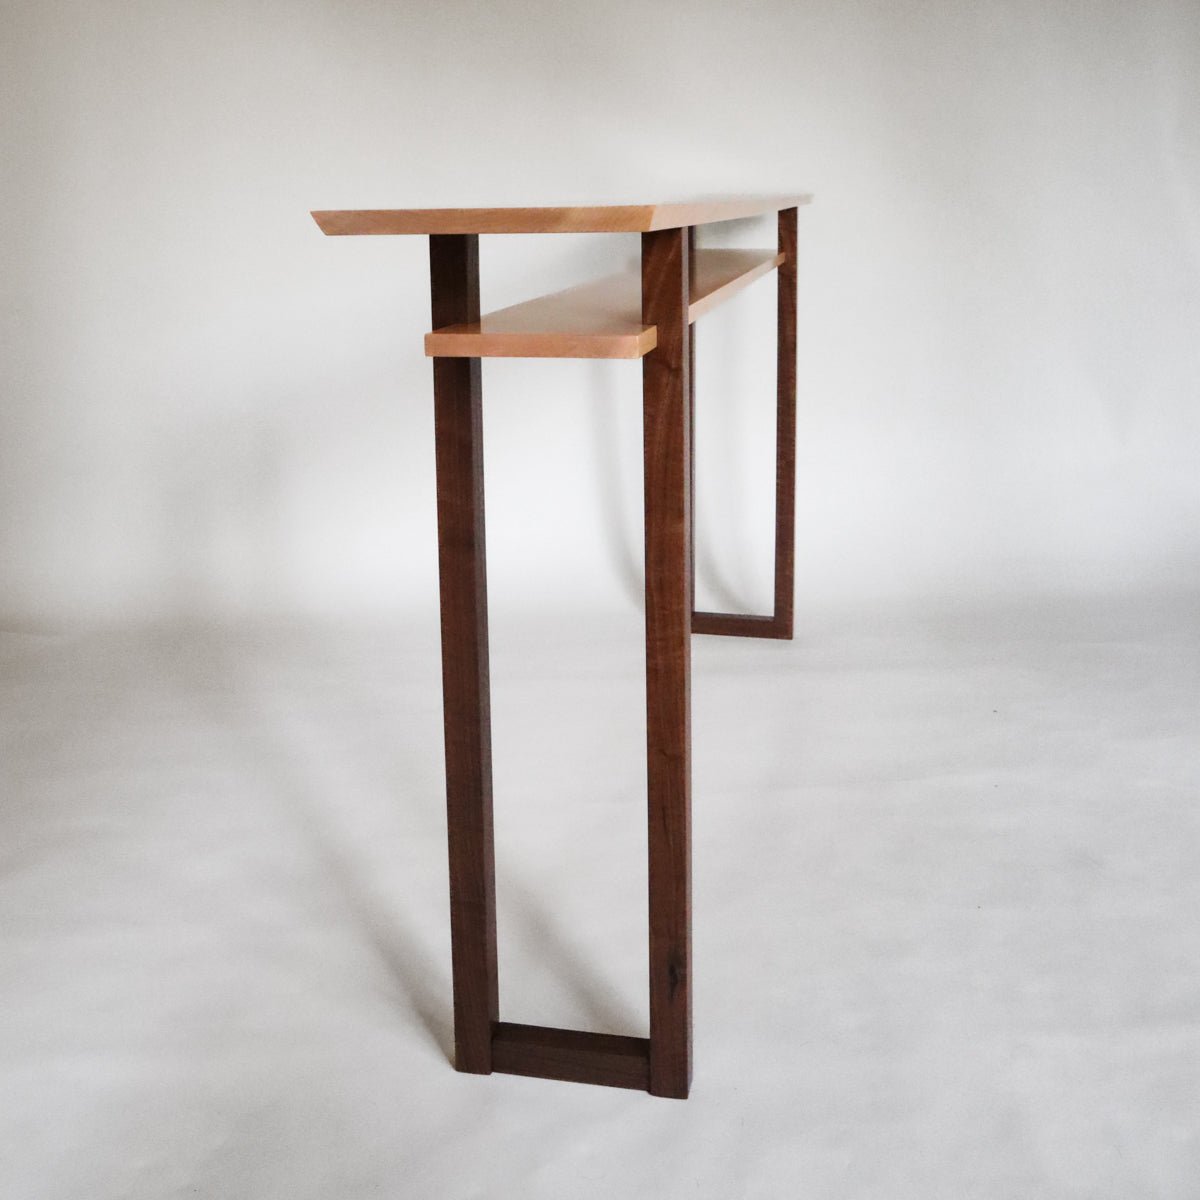 A long narrow console table for hallways by Mokuzai Furniture.